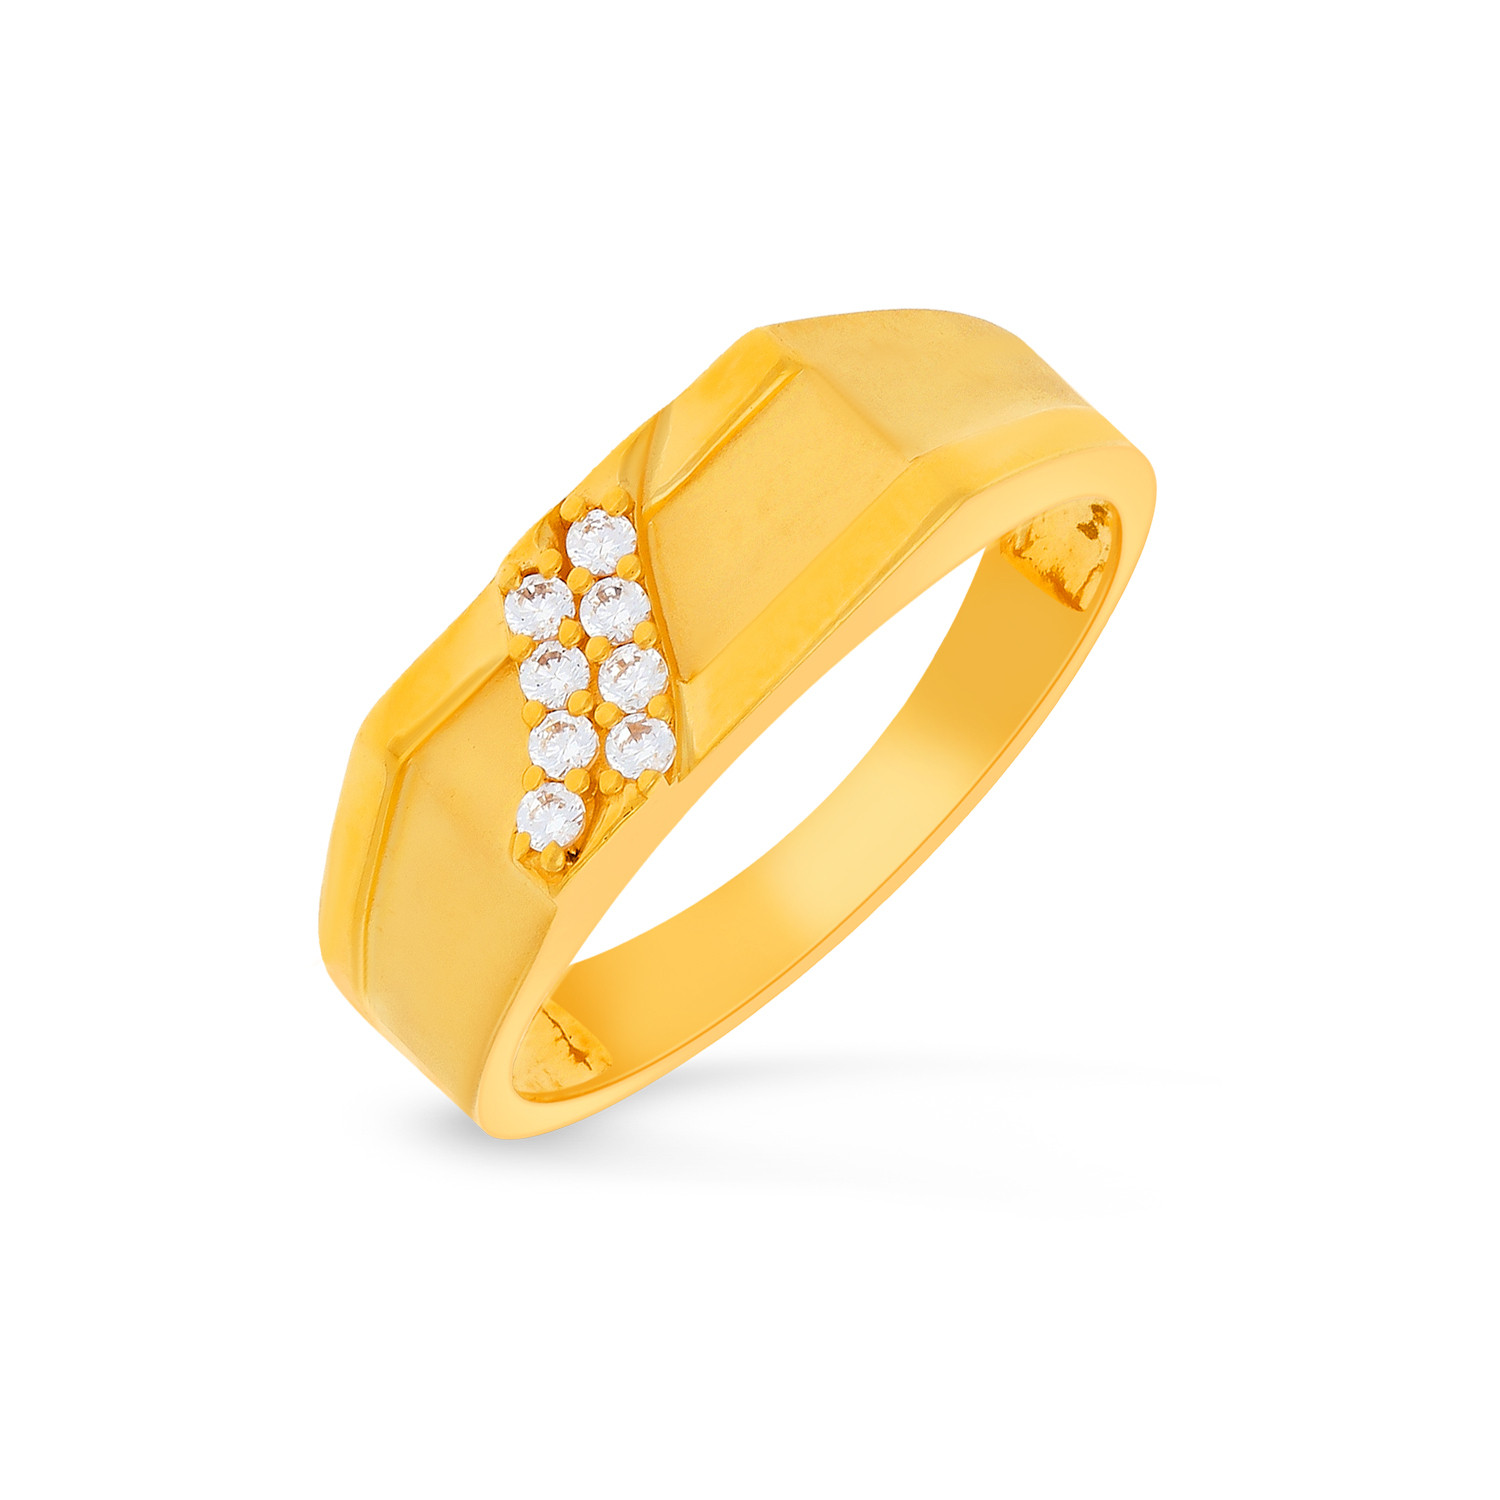 malabarringdesigns #svdrawings Malabar 22kt gold Mangalasutra Ring Designs  with Weight and Price